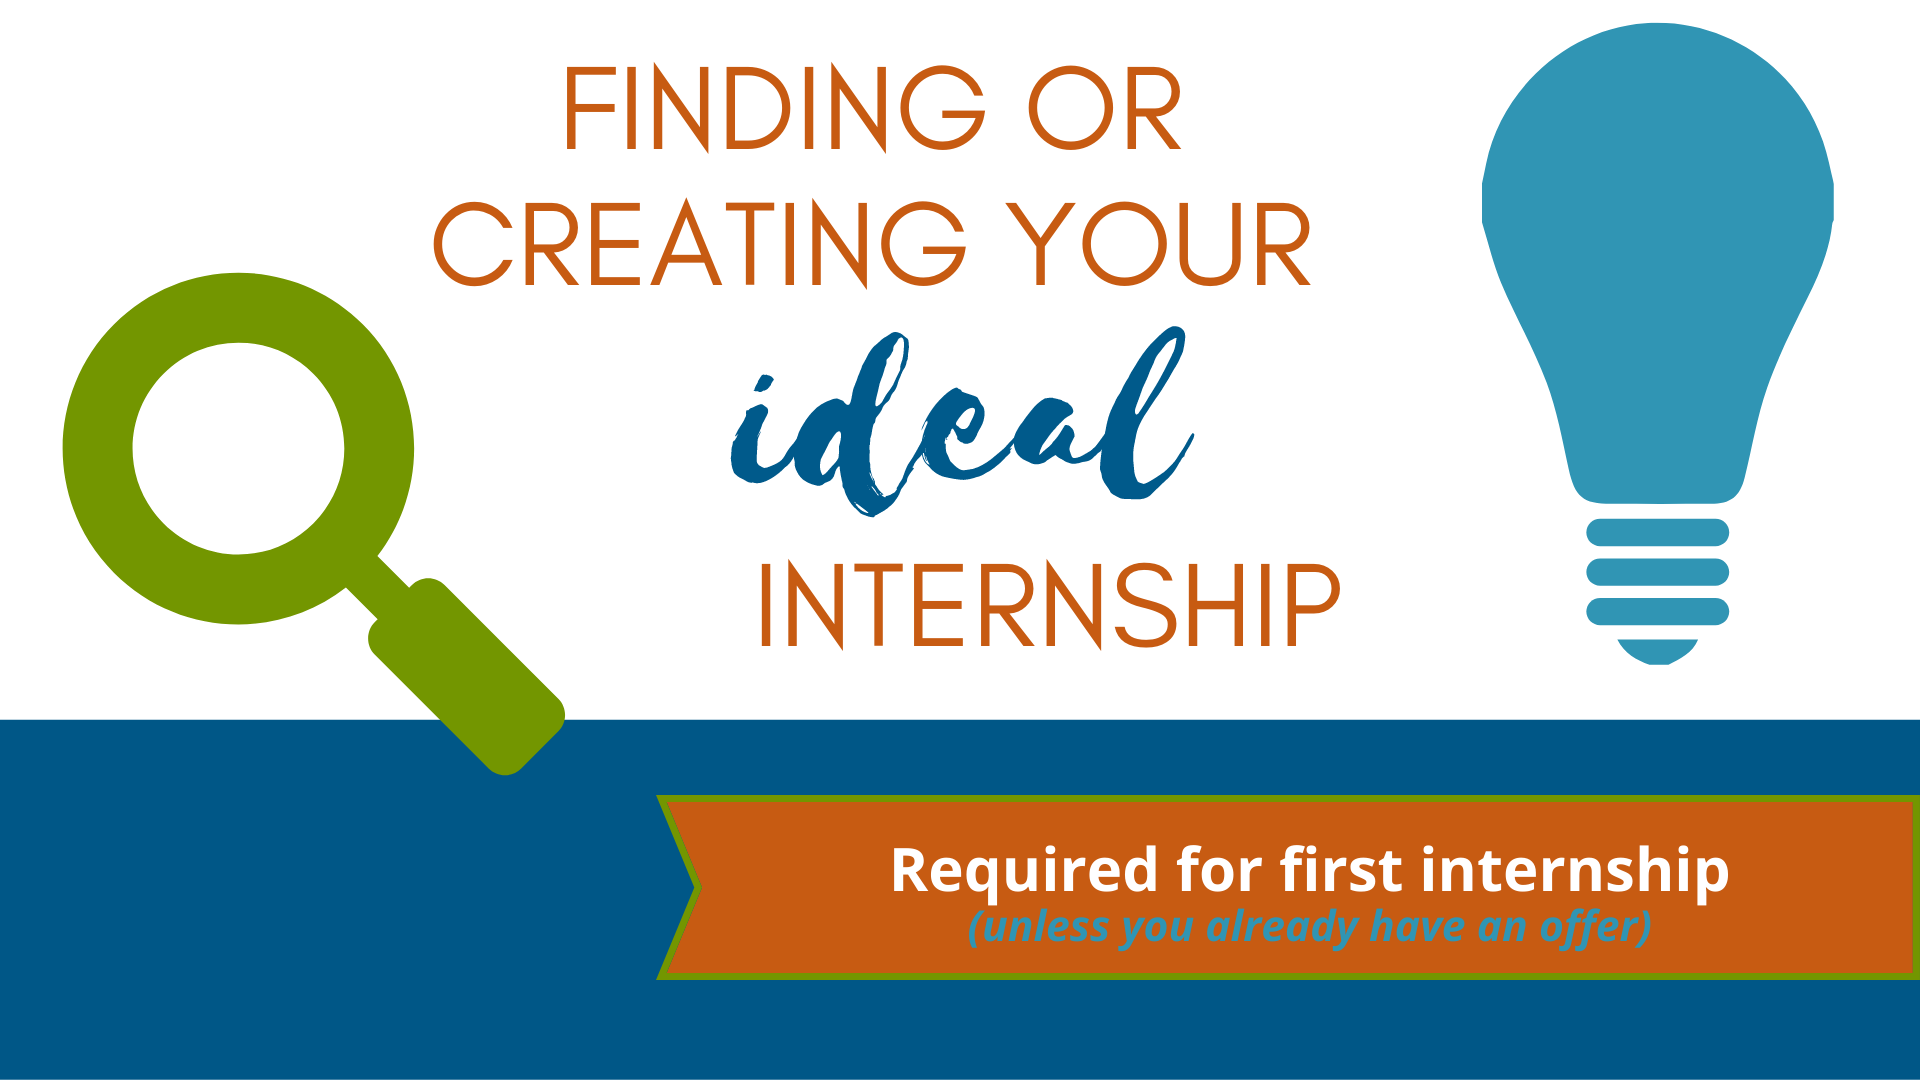 Finding or Creating Your Ideal Internship